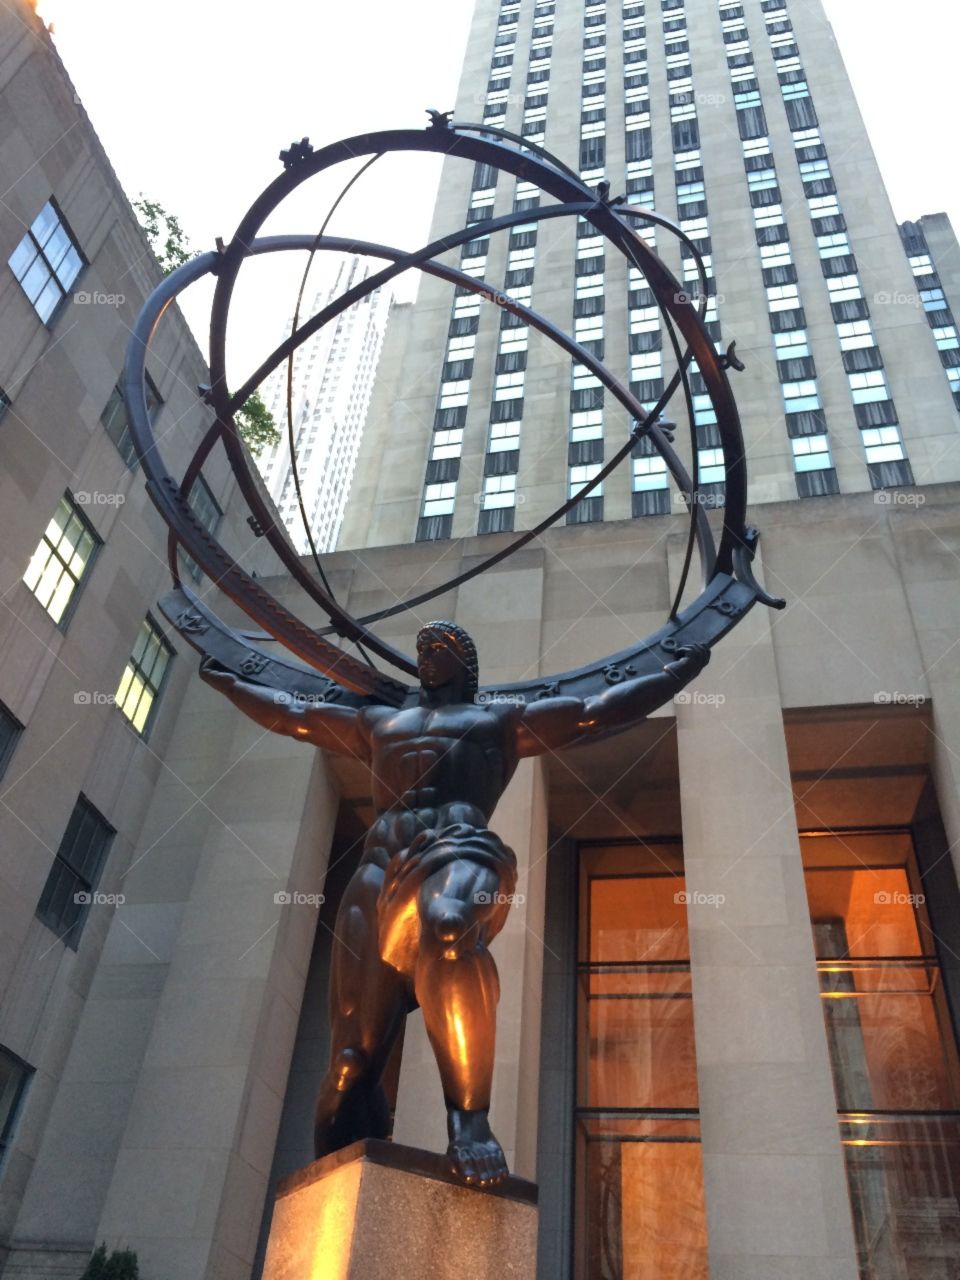 A view of Rockefeller Center's famous Atlas statue during the day, New York.